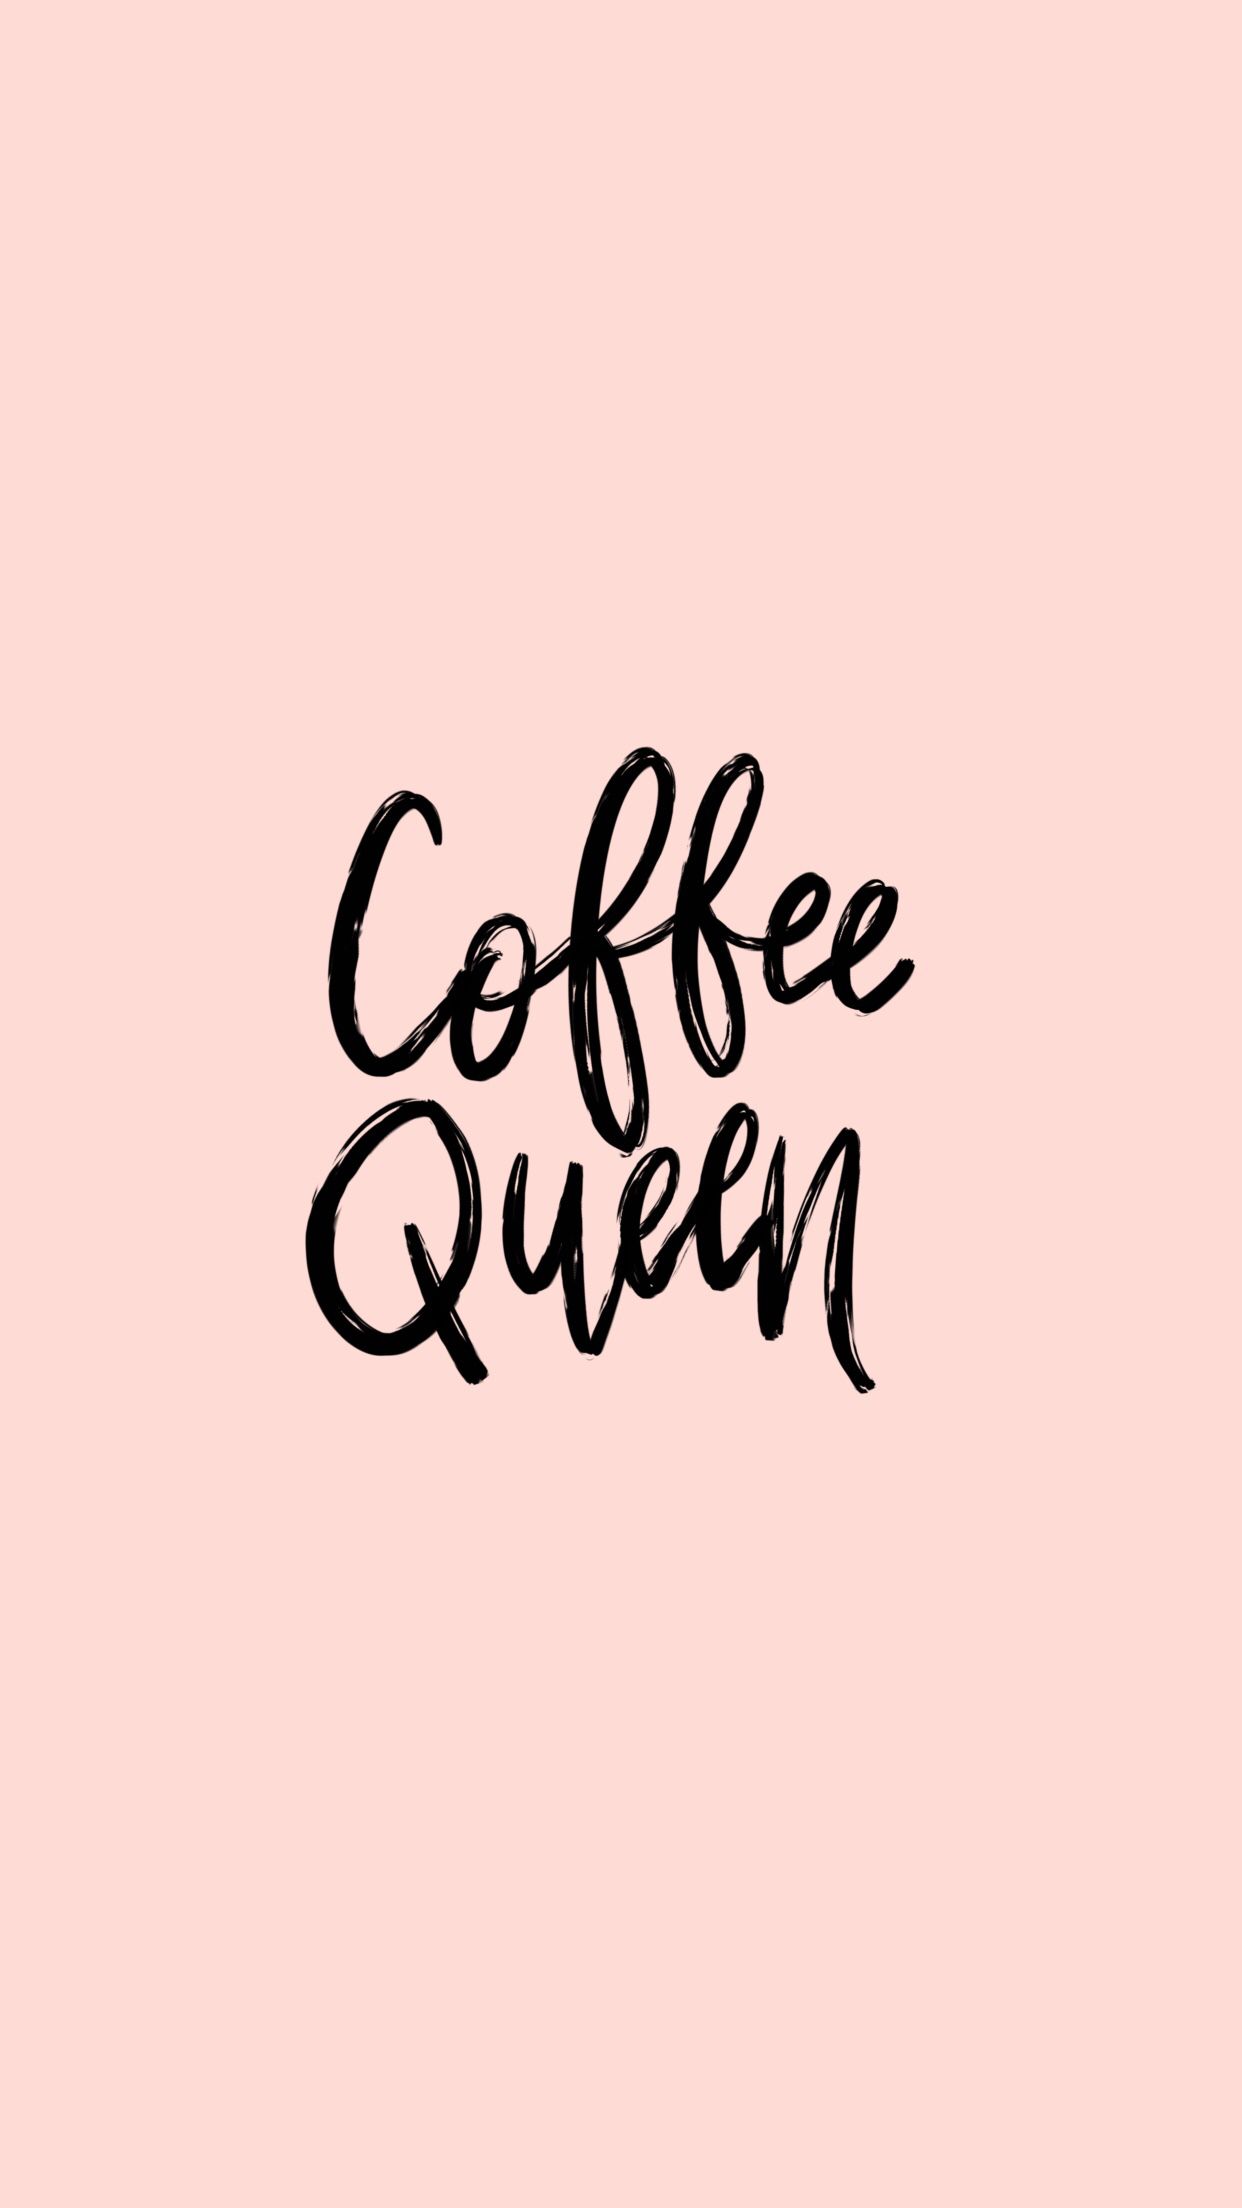 cute cartoon characters funny aesthetic profile picture: iPhone Queen Aesthetic Wallpaper